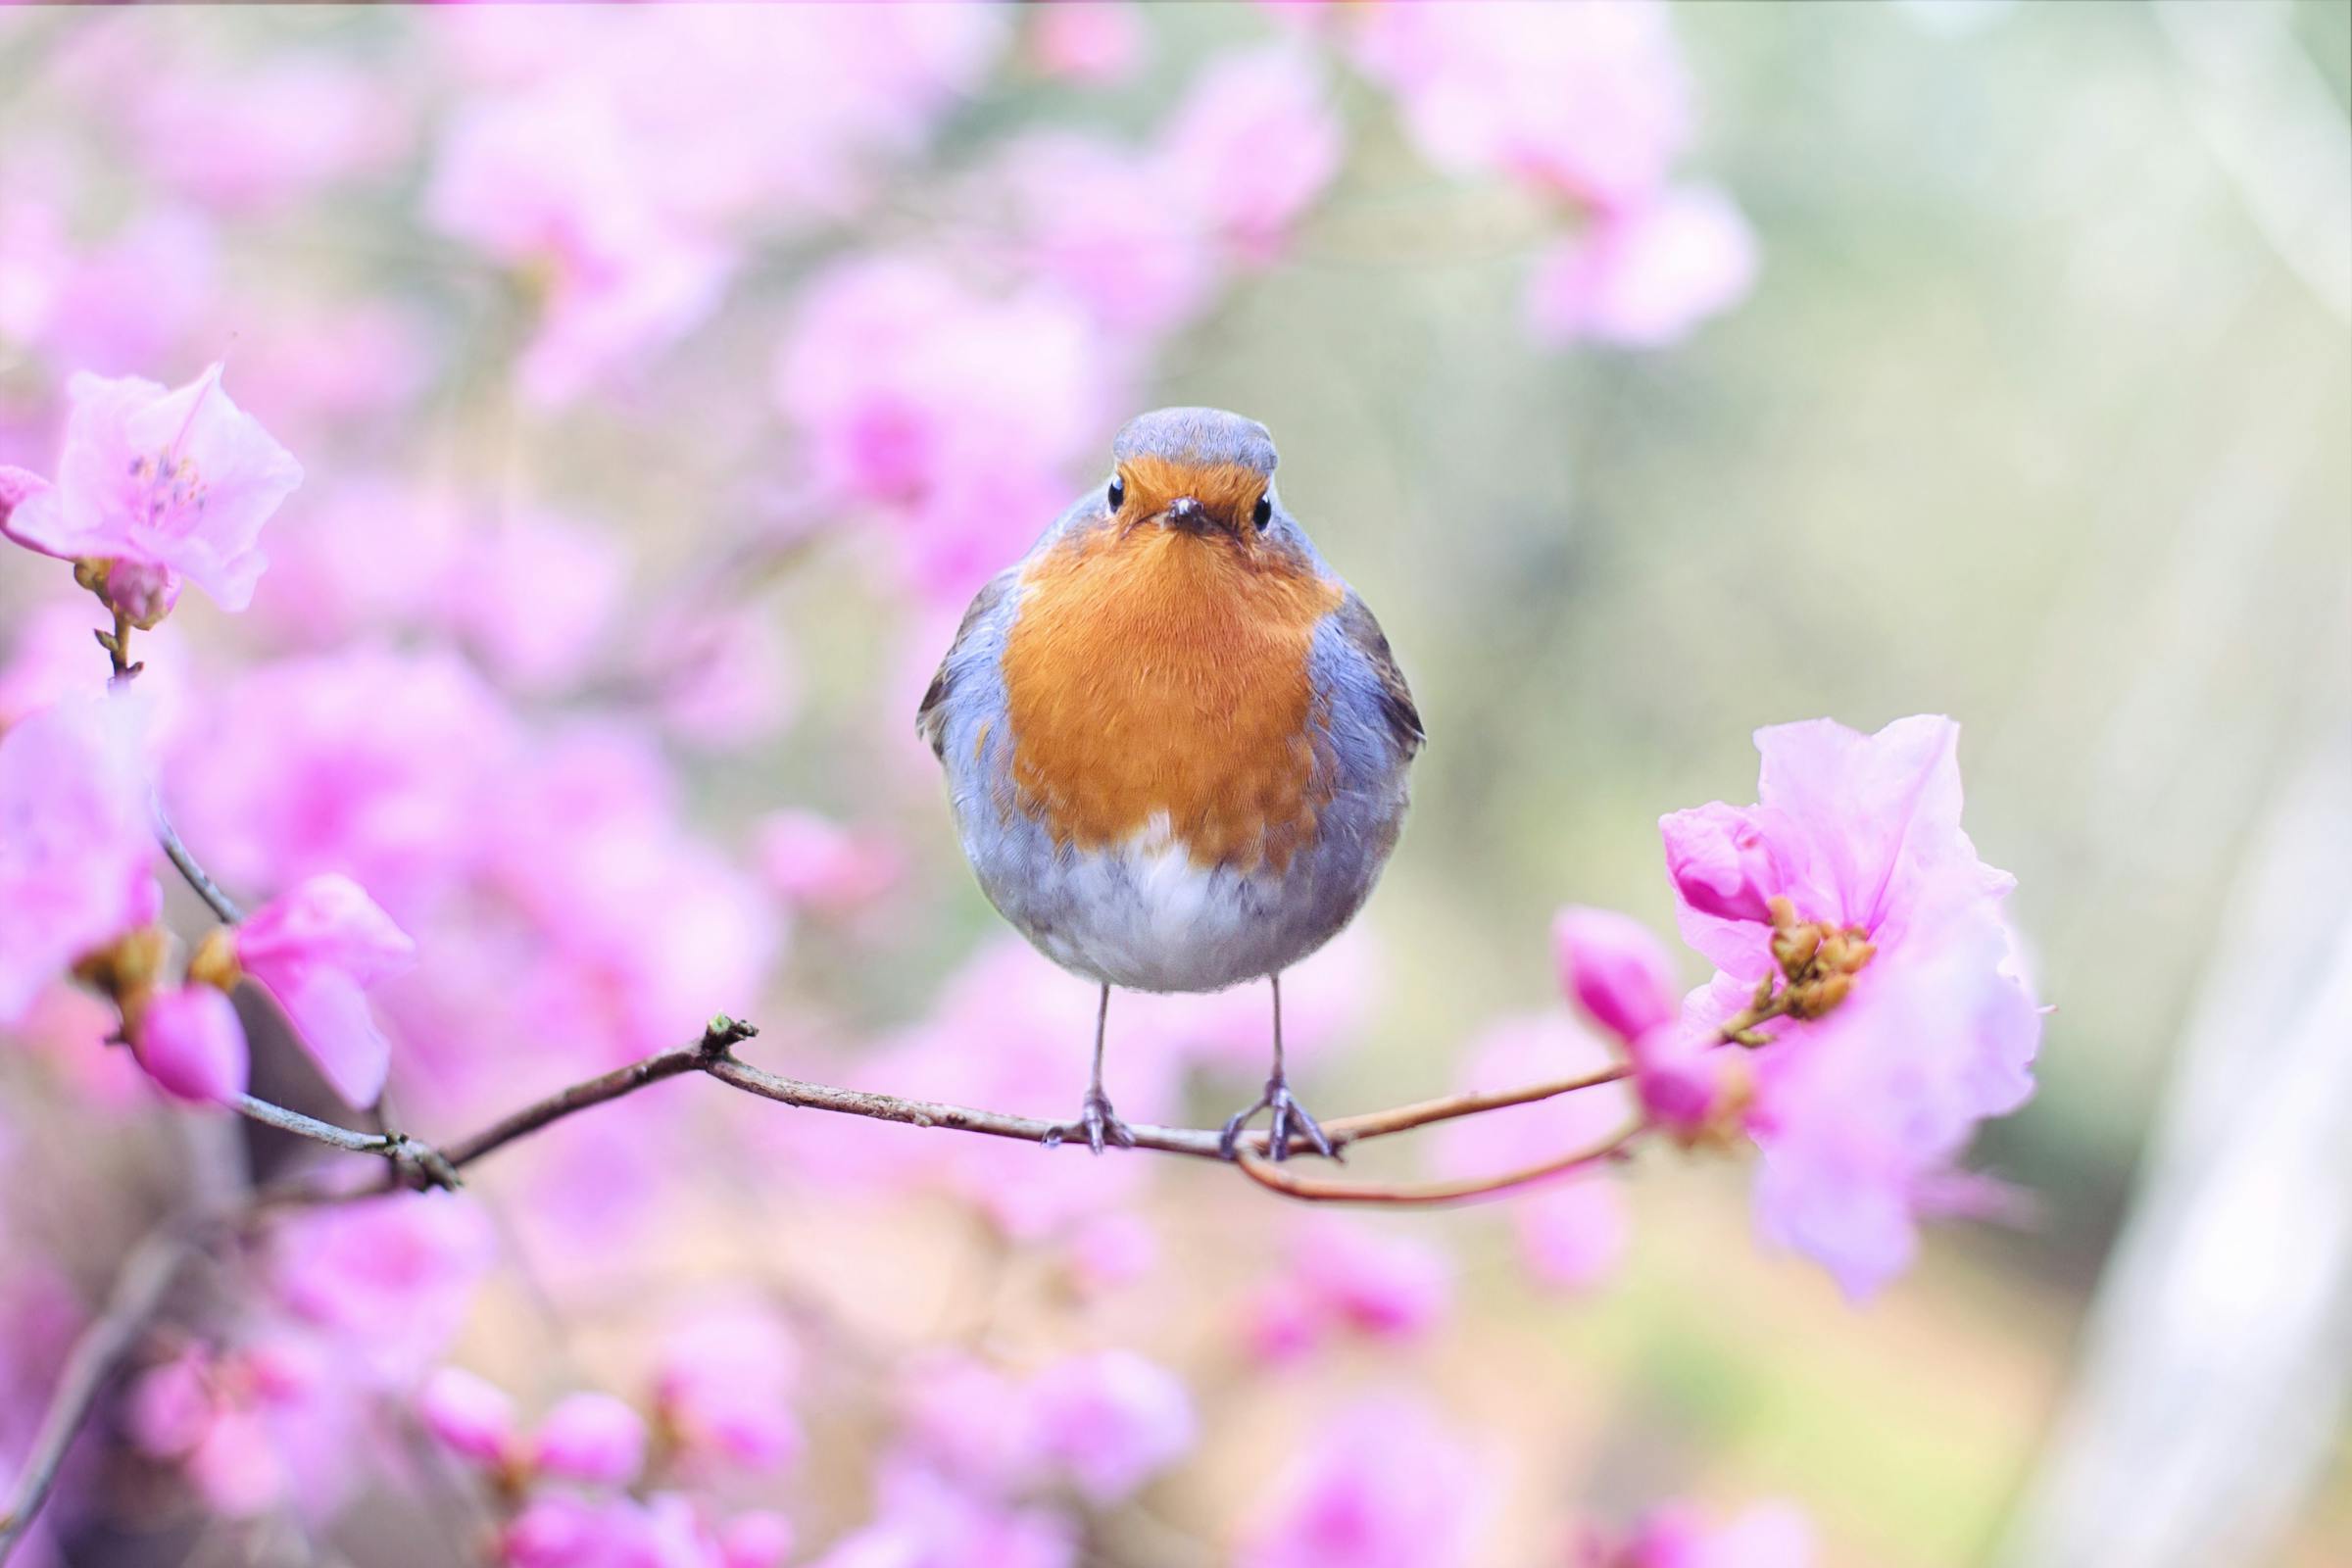 Cute little bird sitting on small branch of tree with flowers